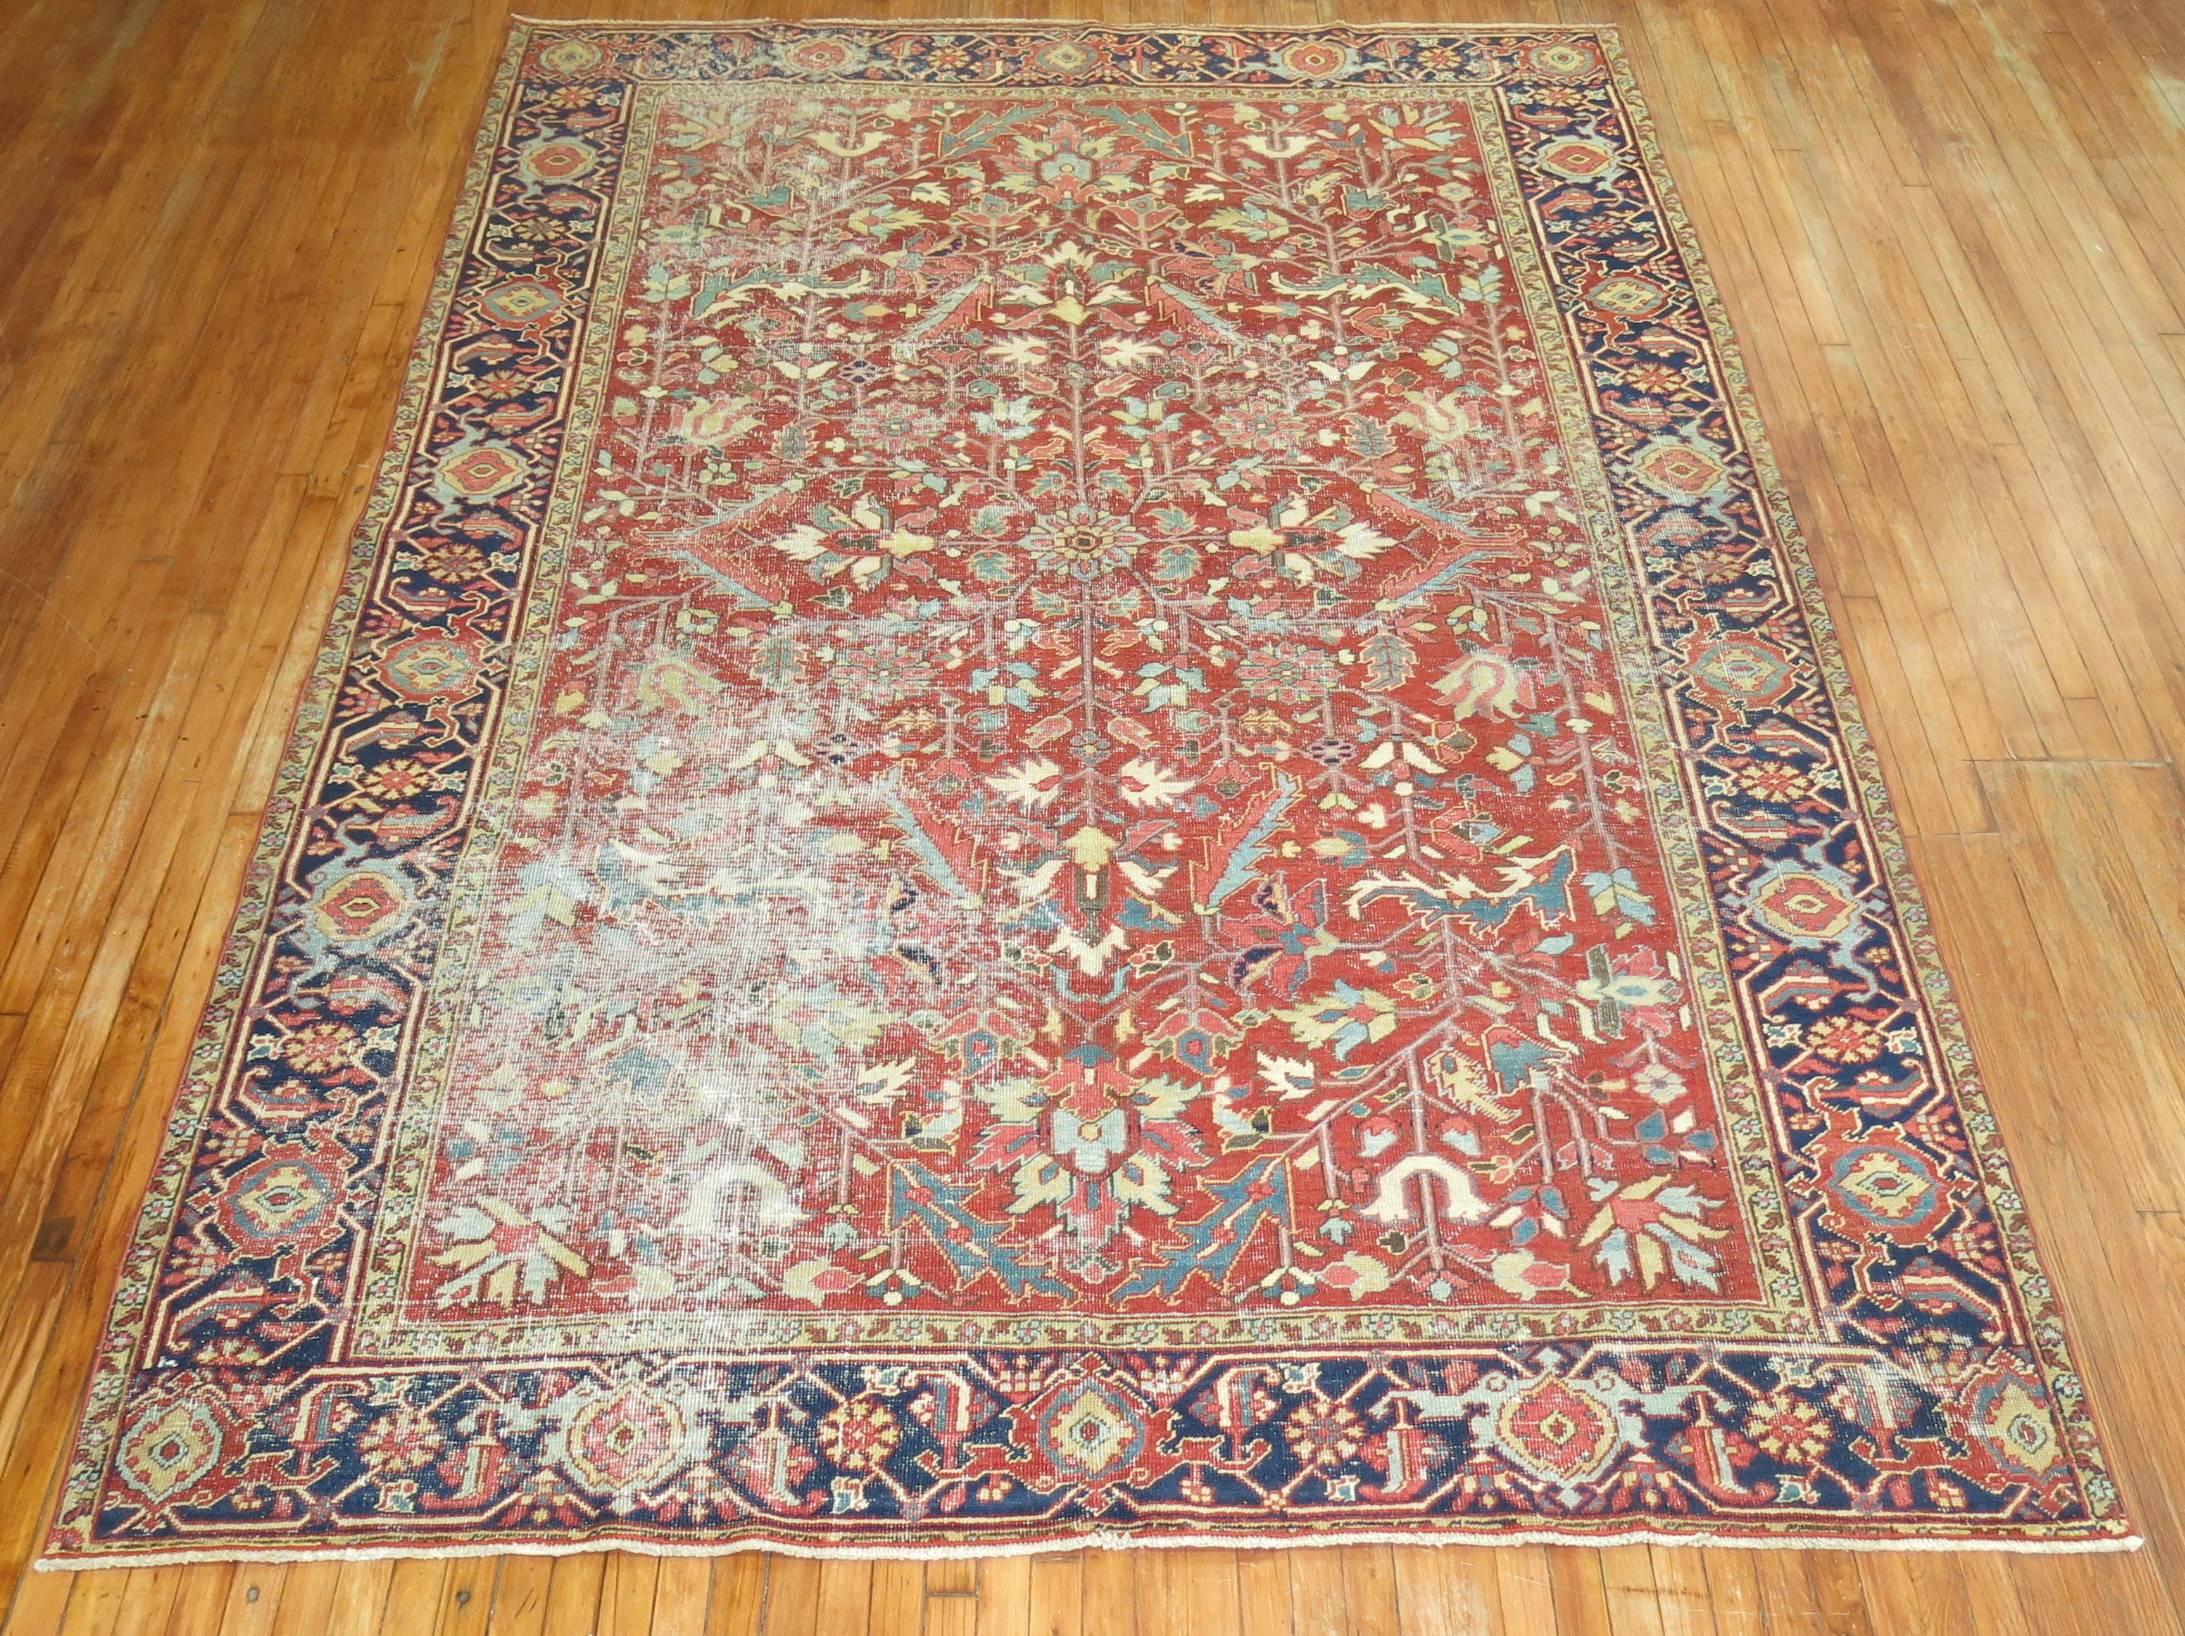 Room size early 20th century shabby chic Persian Heriz rug featuring an all-over design in cherry red.

Measures: 7'9